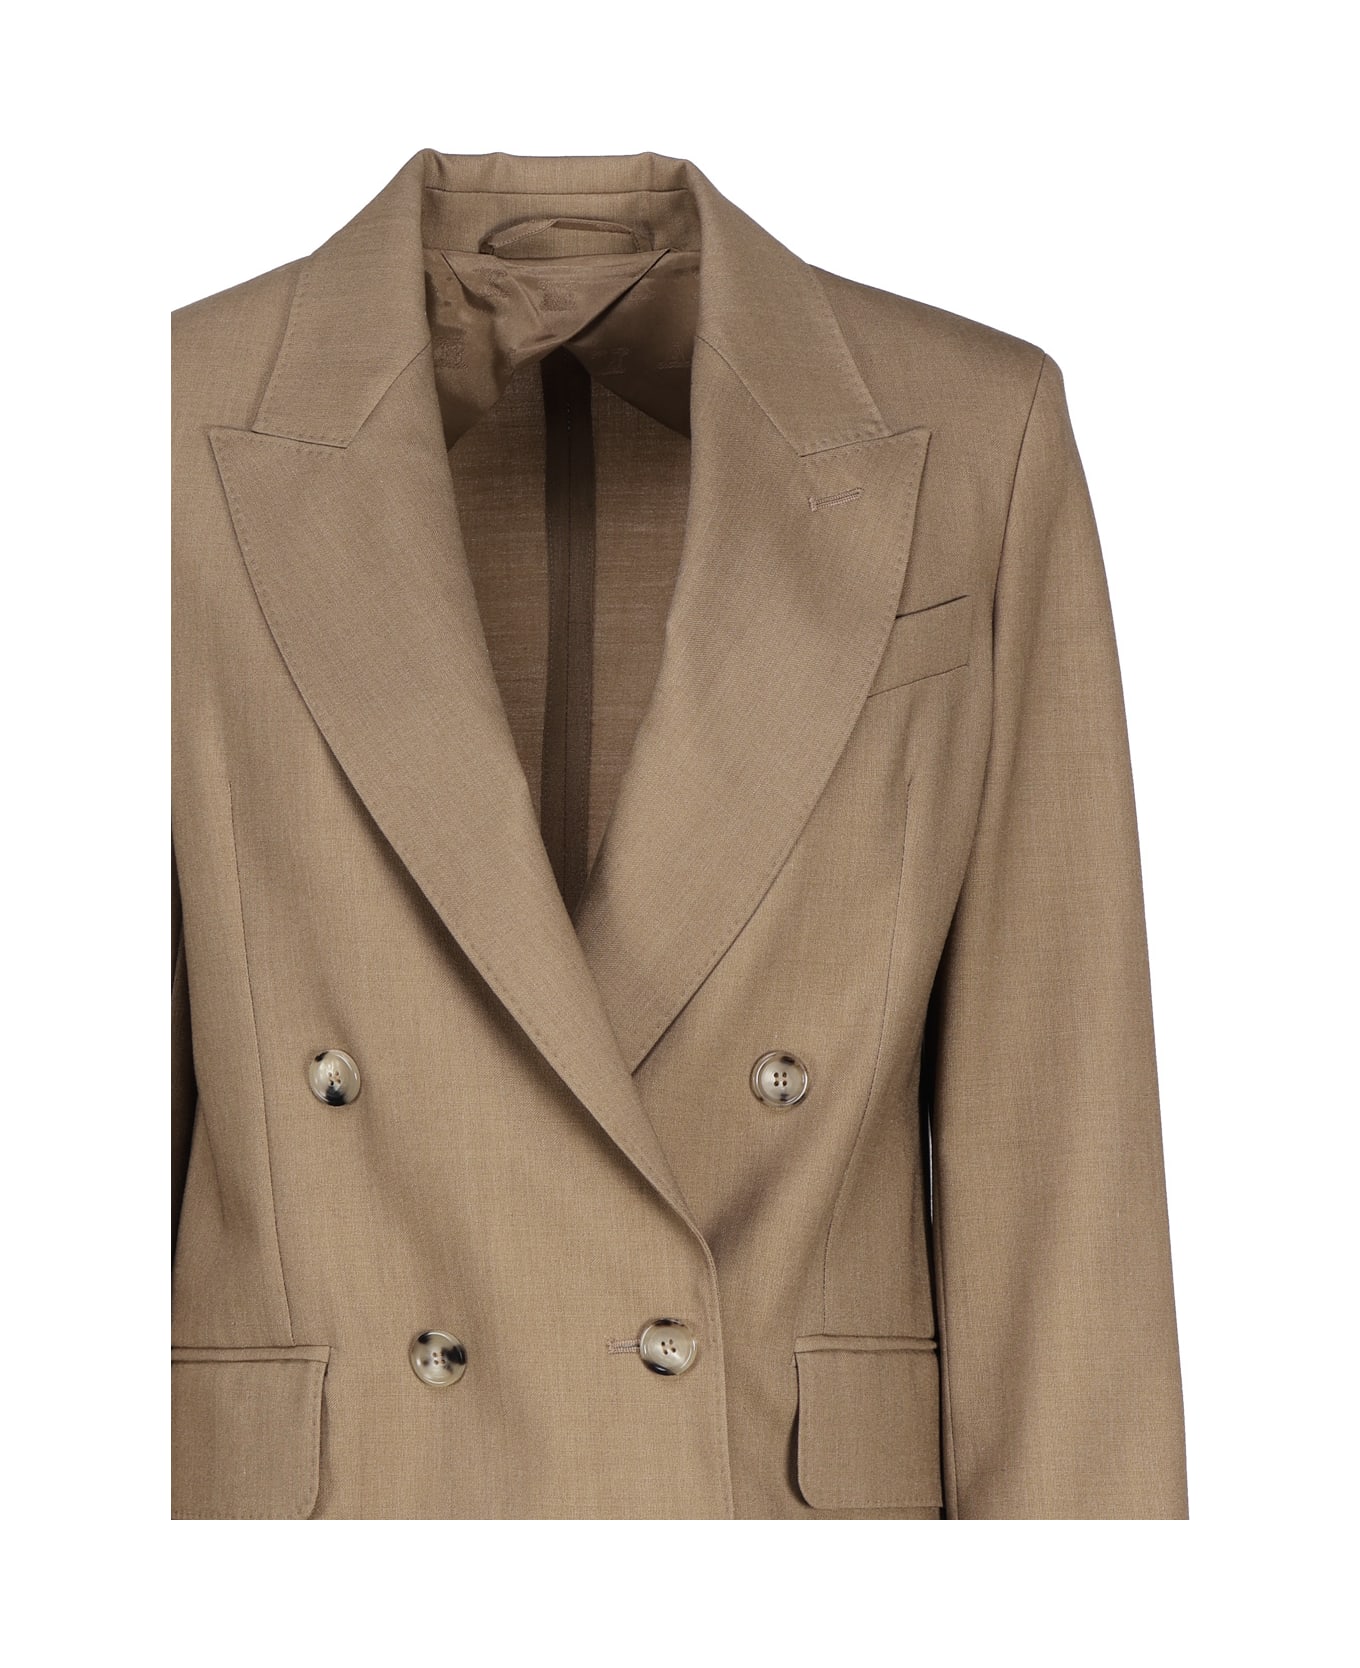 Max Mara Double Breasted Blazer In Wool Blend - Cammello